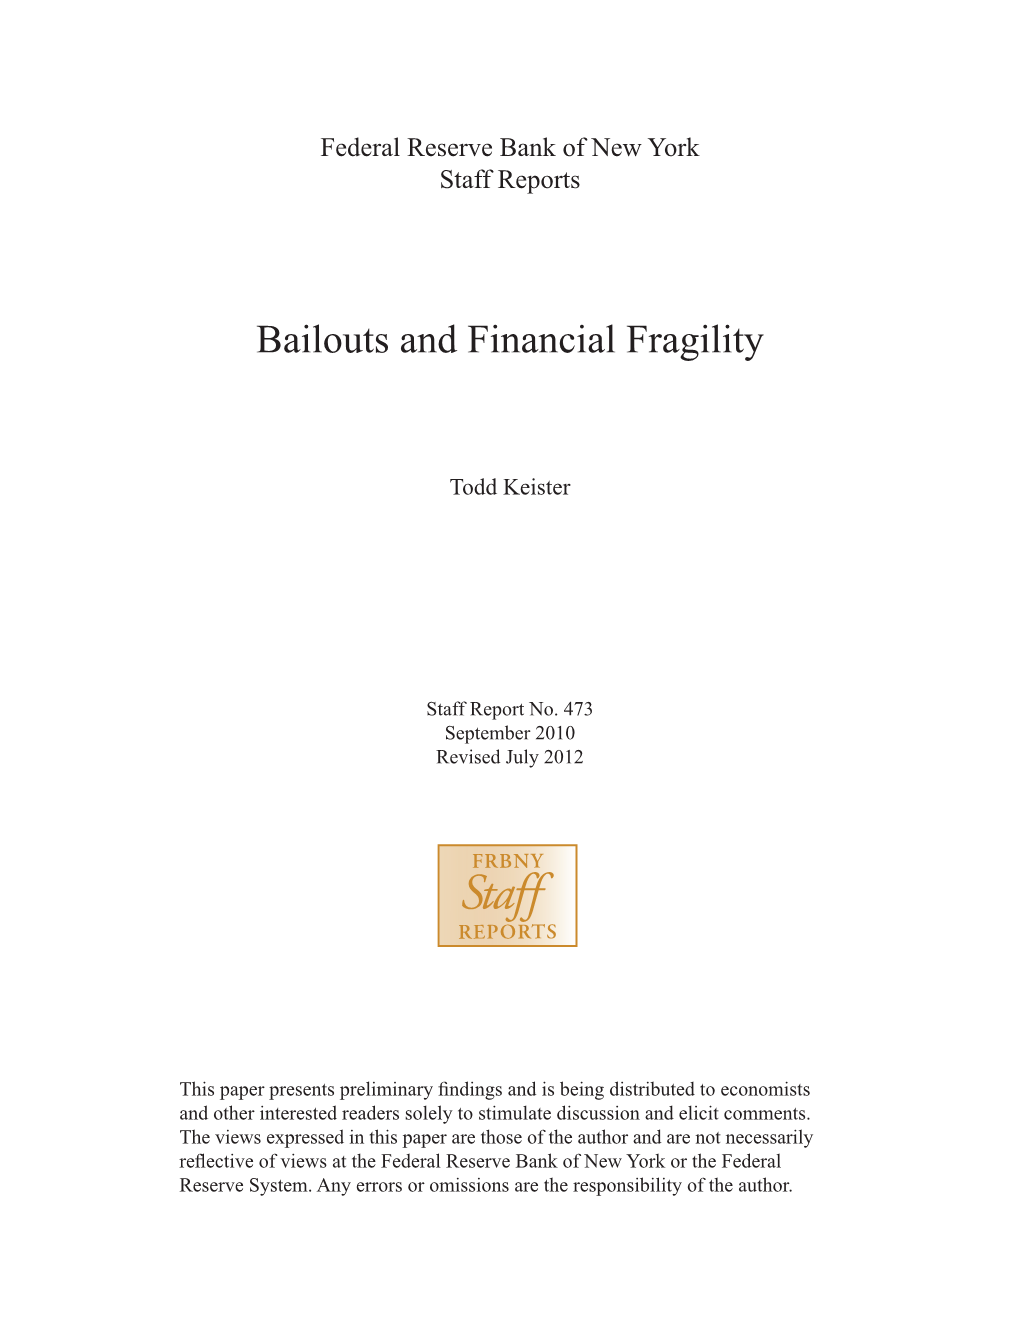 Bailouts and Financial Fragility